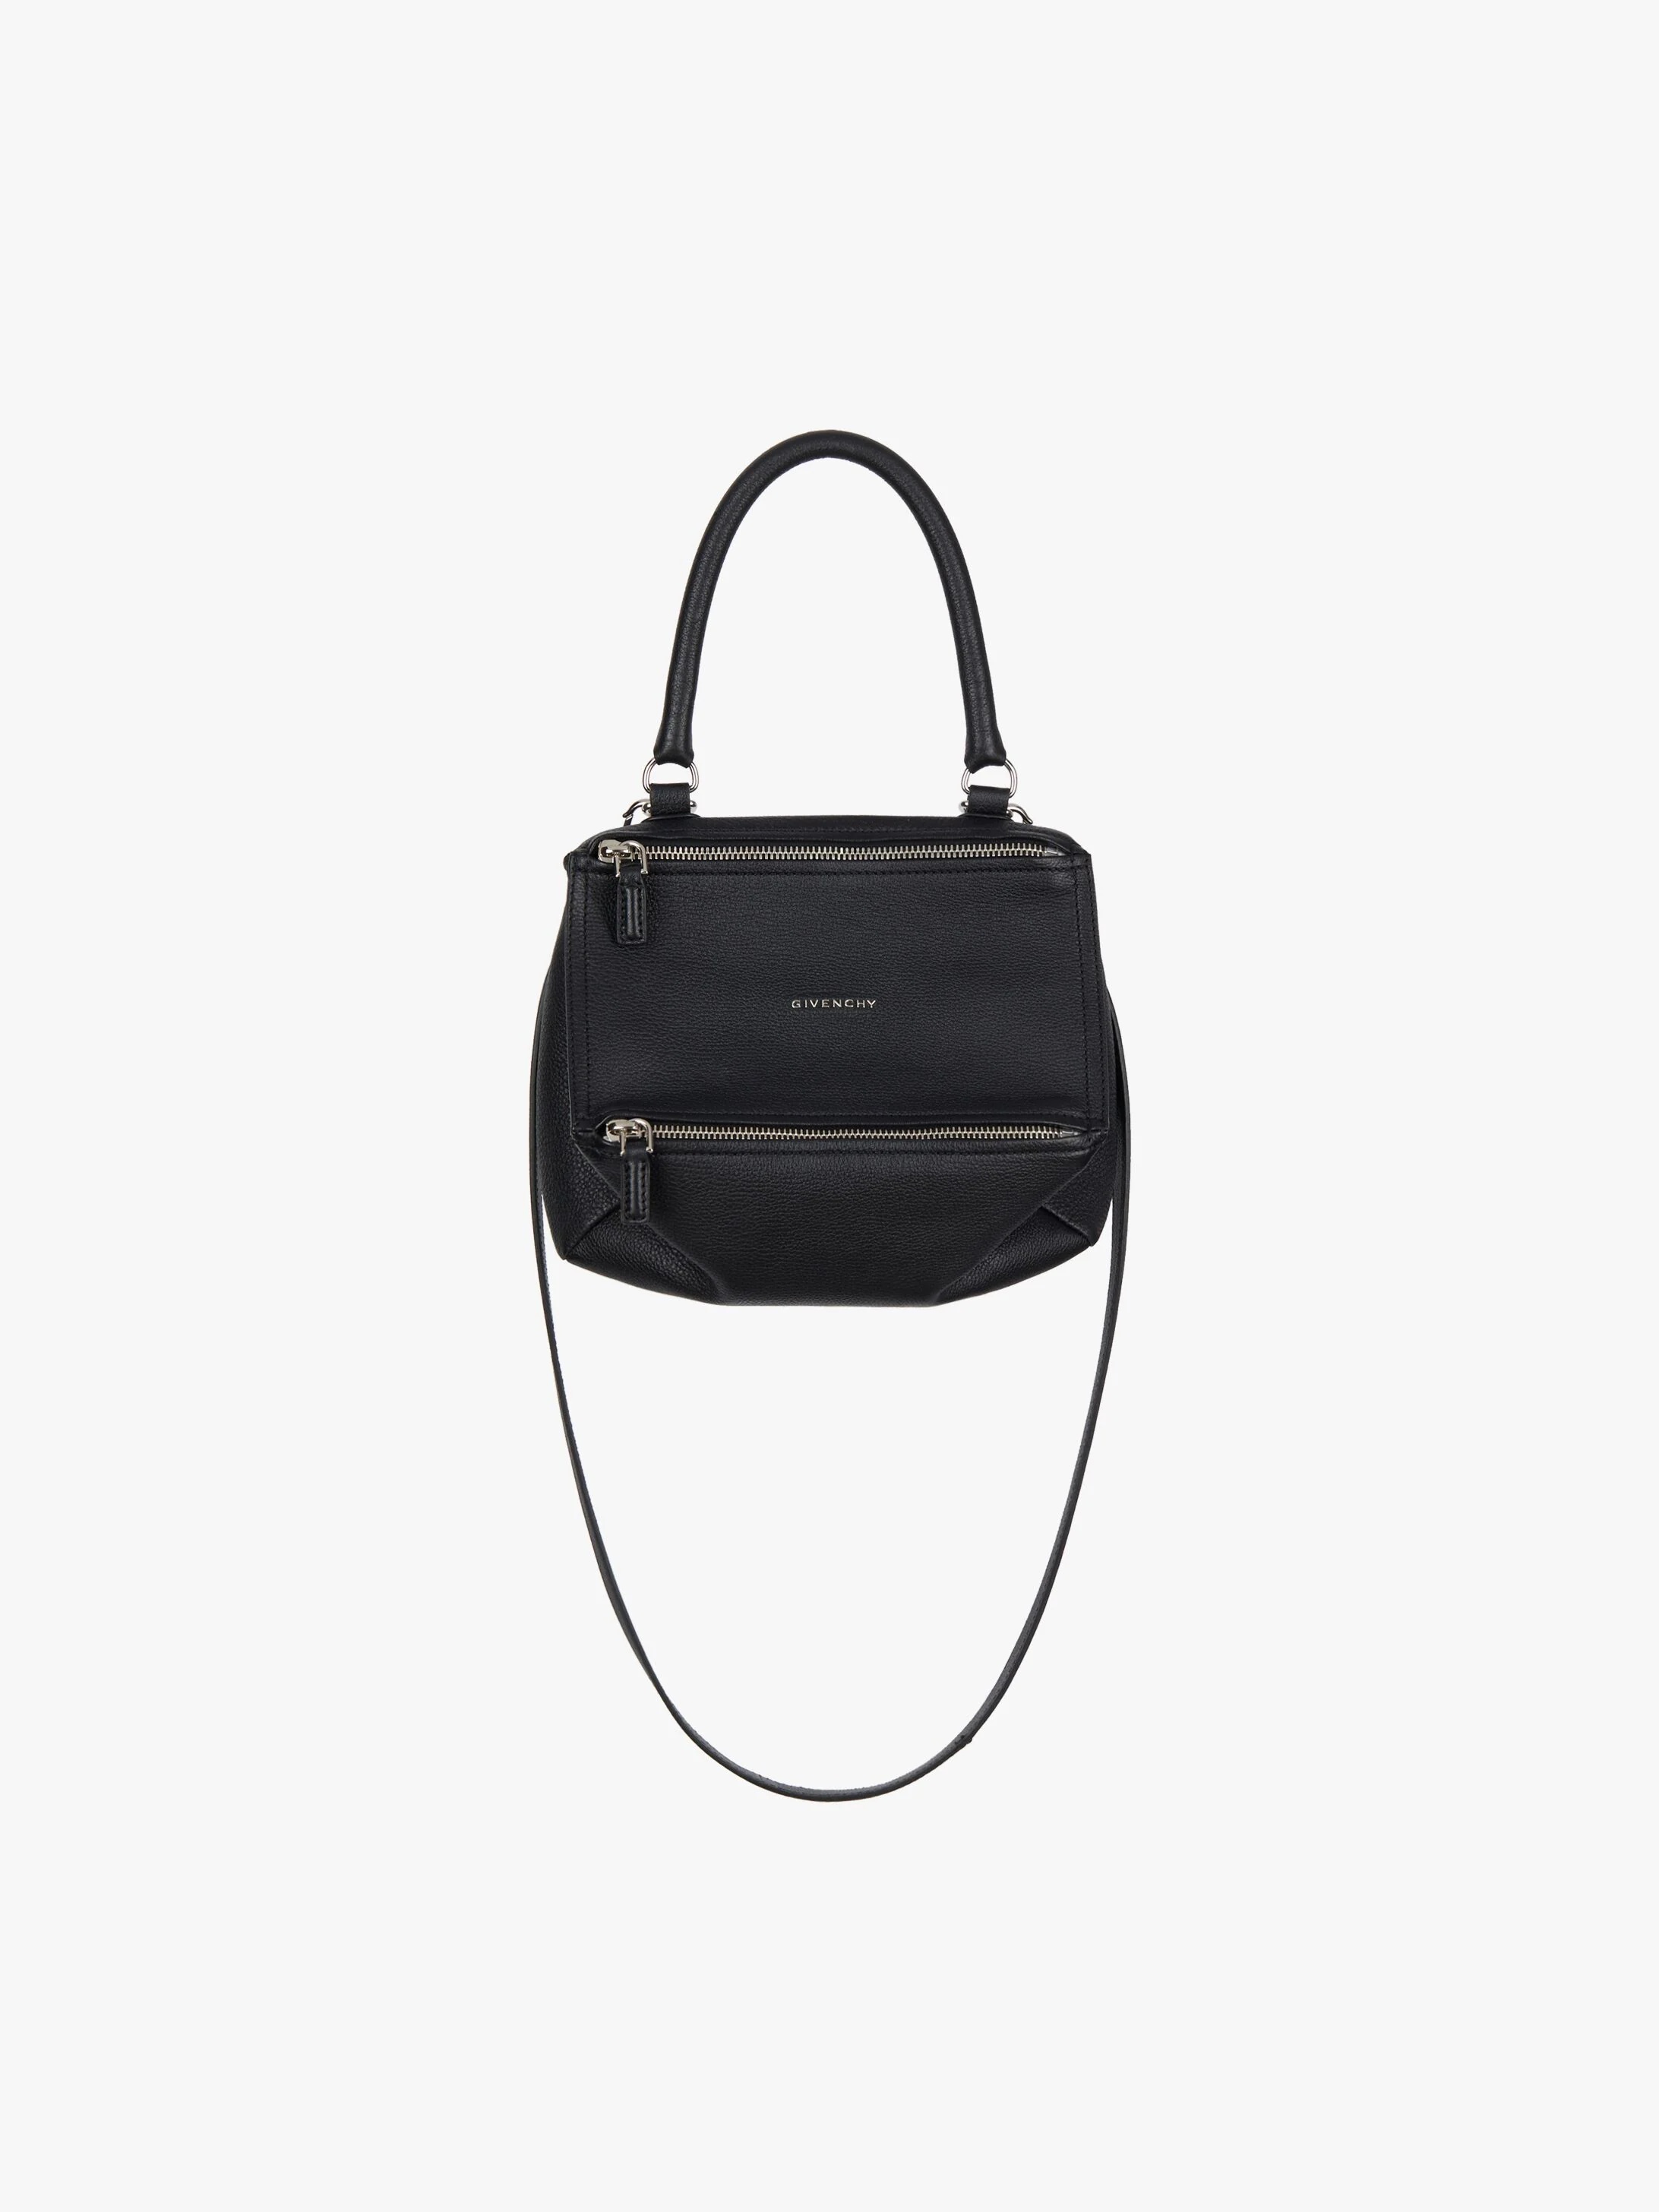 SMALL PANDORA BAG IN GRAINED LEATHER - 1